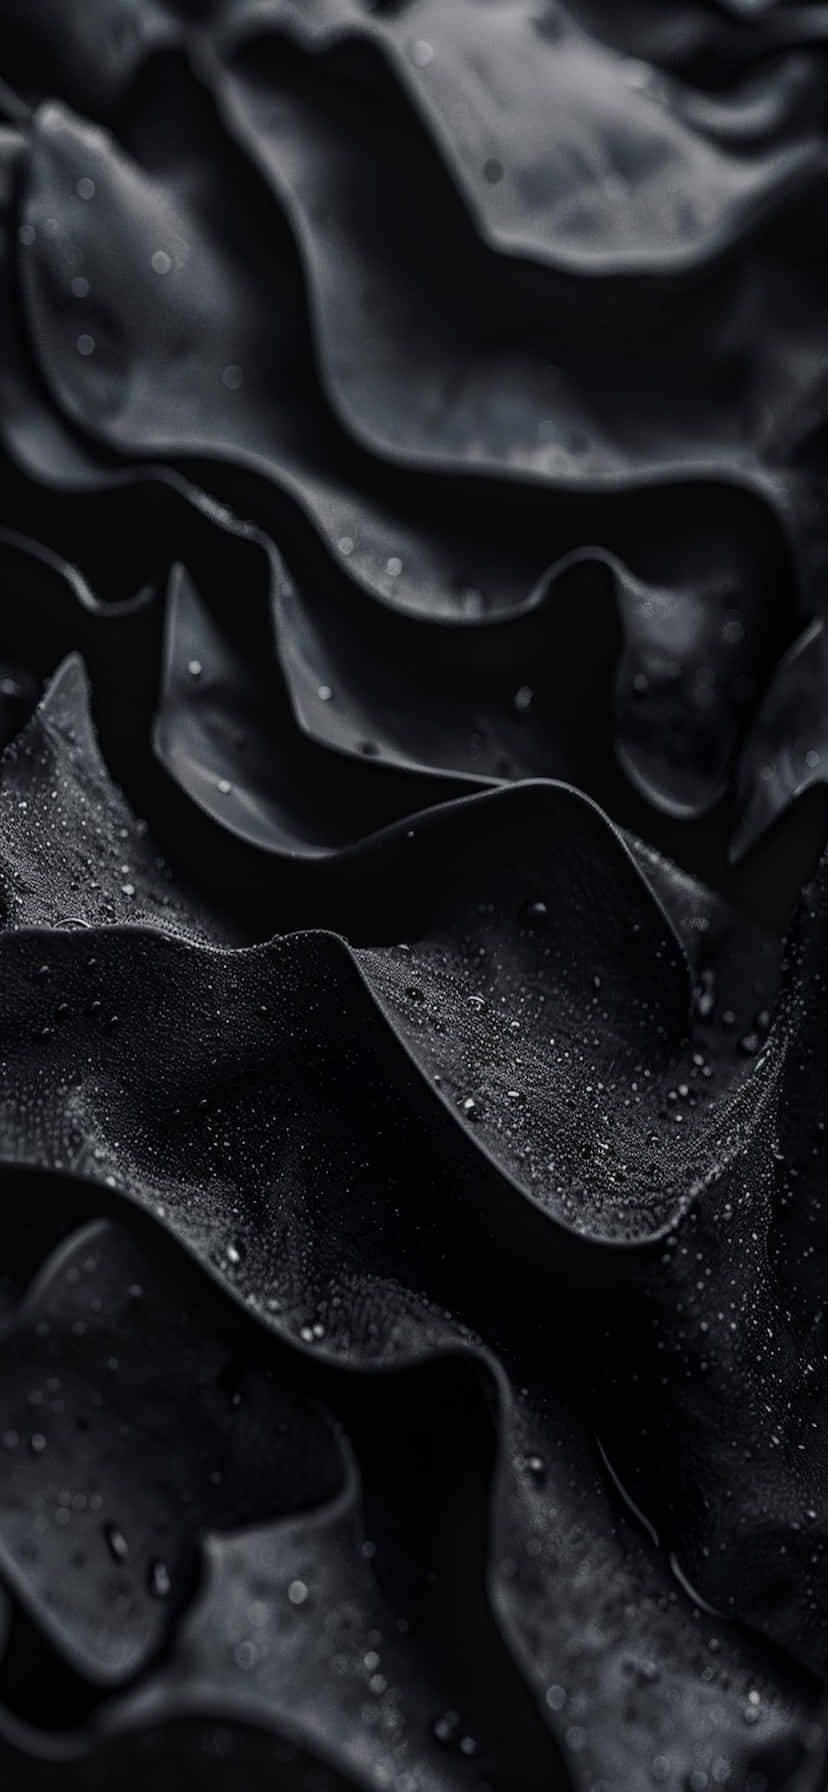 Black Wavy Texturewith Water Droplets Wallpaper